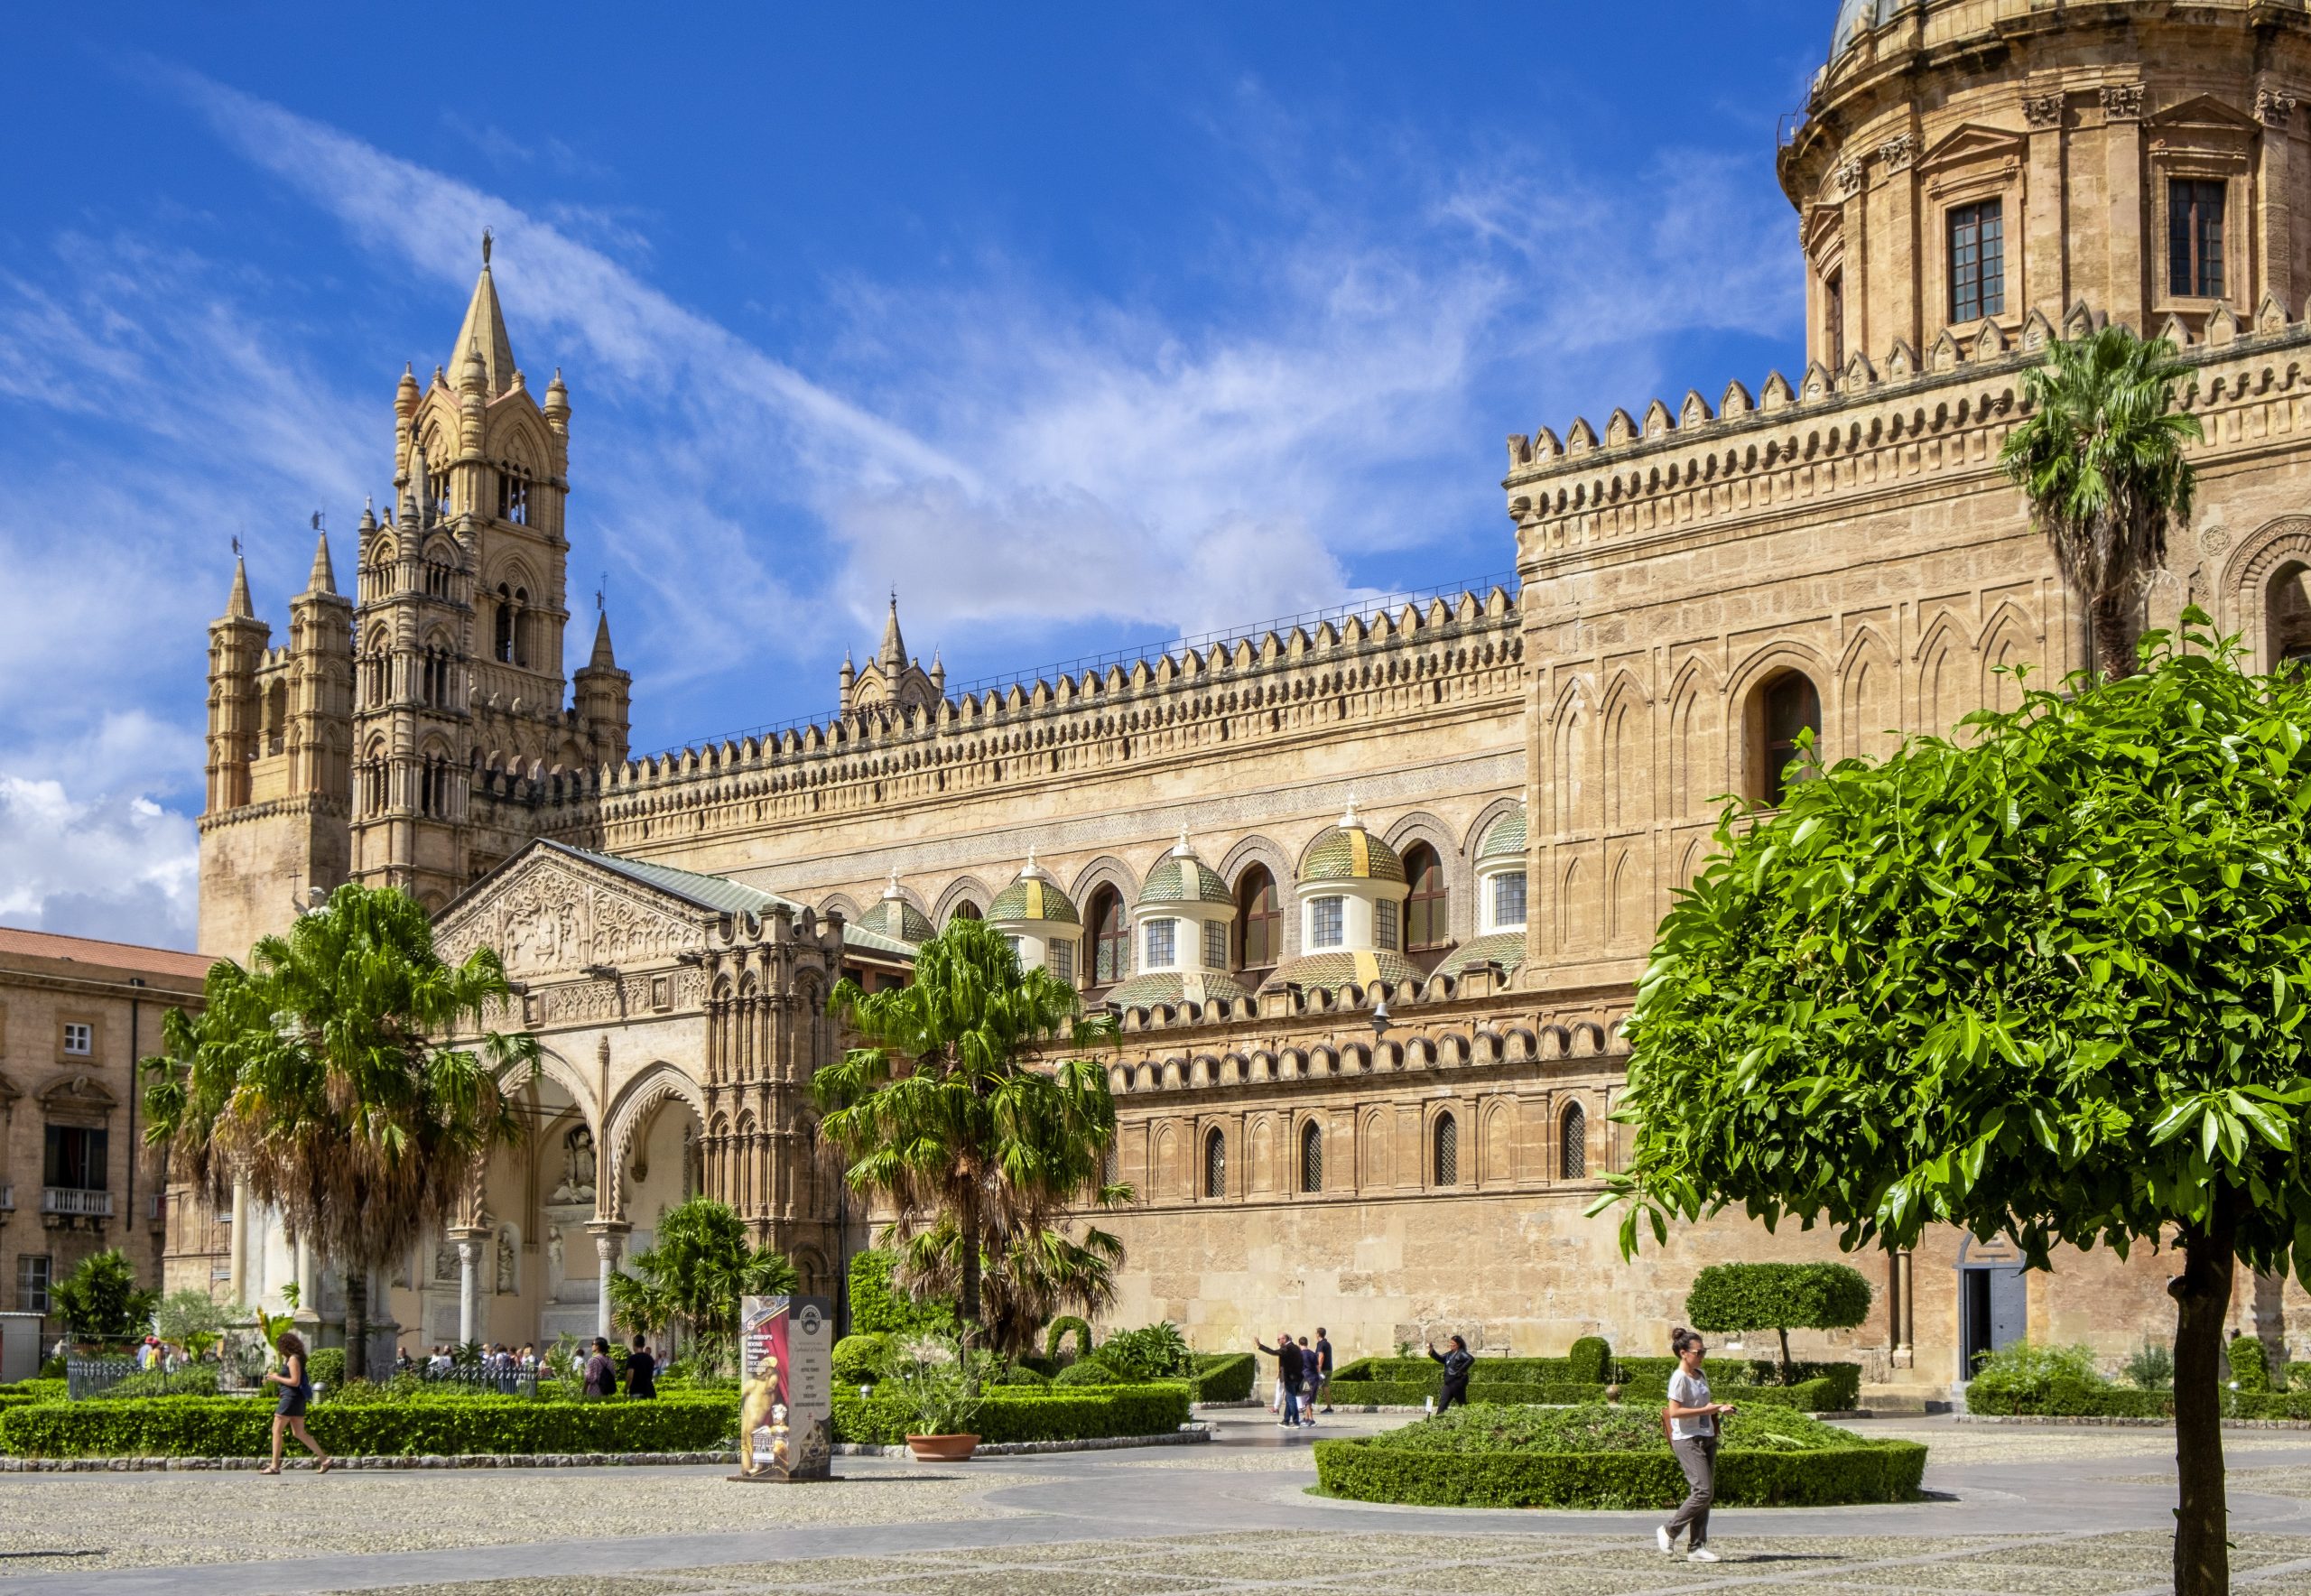 An ornate cathedral with palm trees in front of it in Palermo.